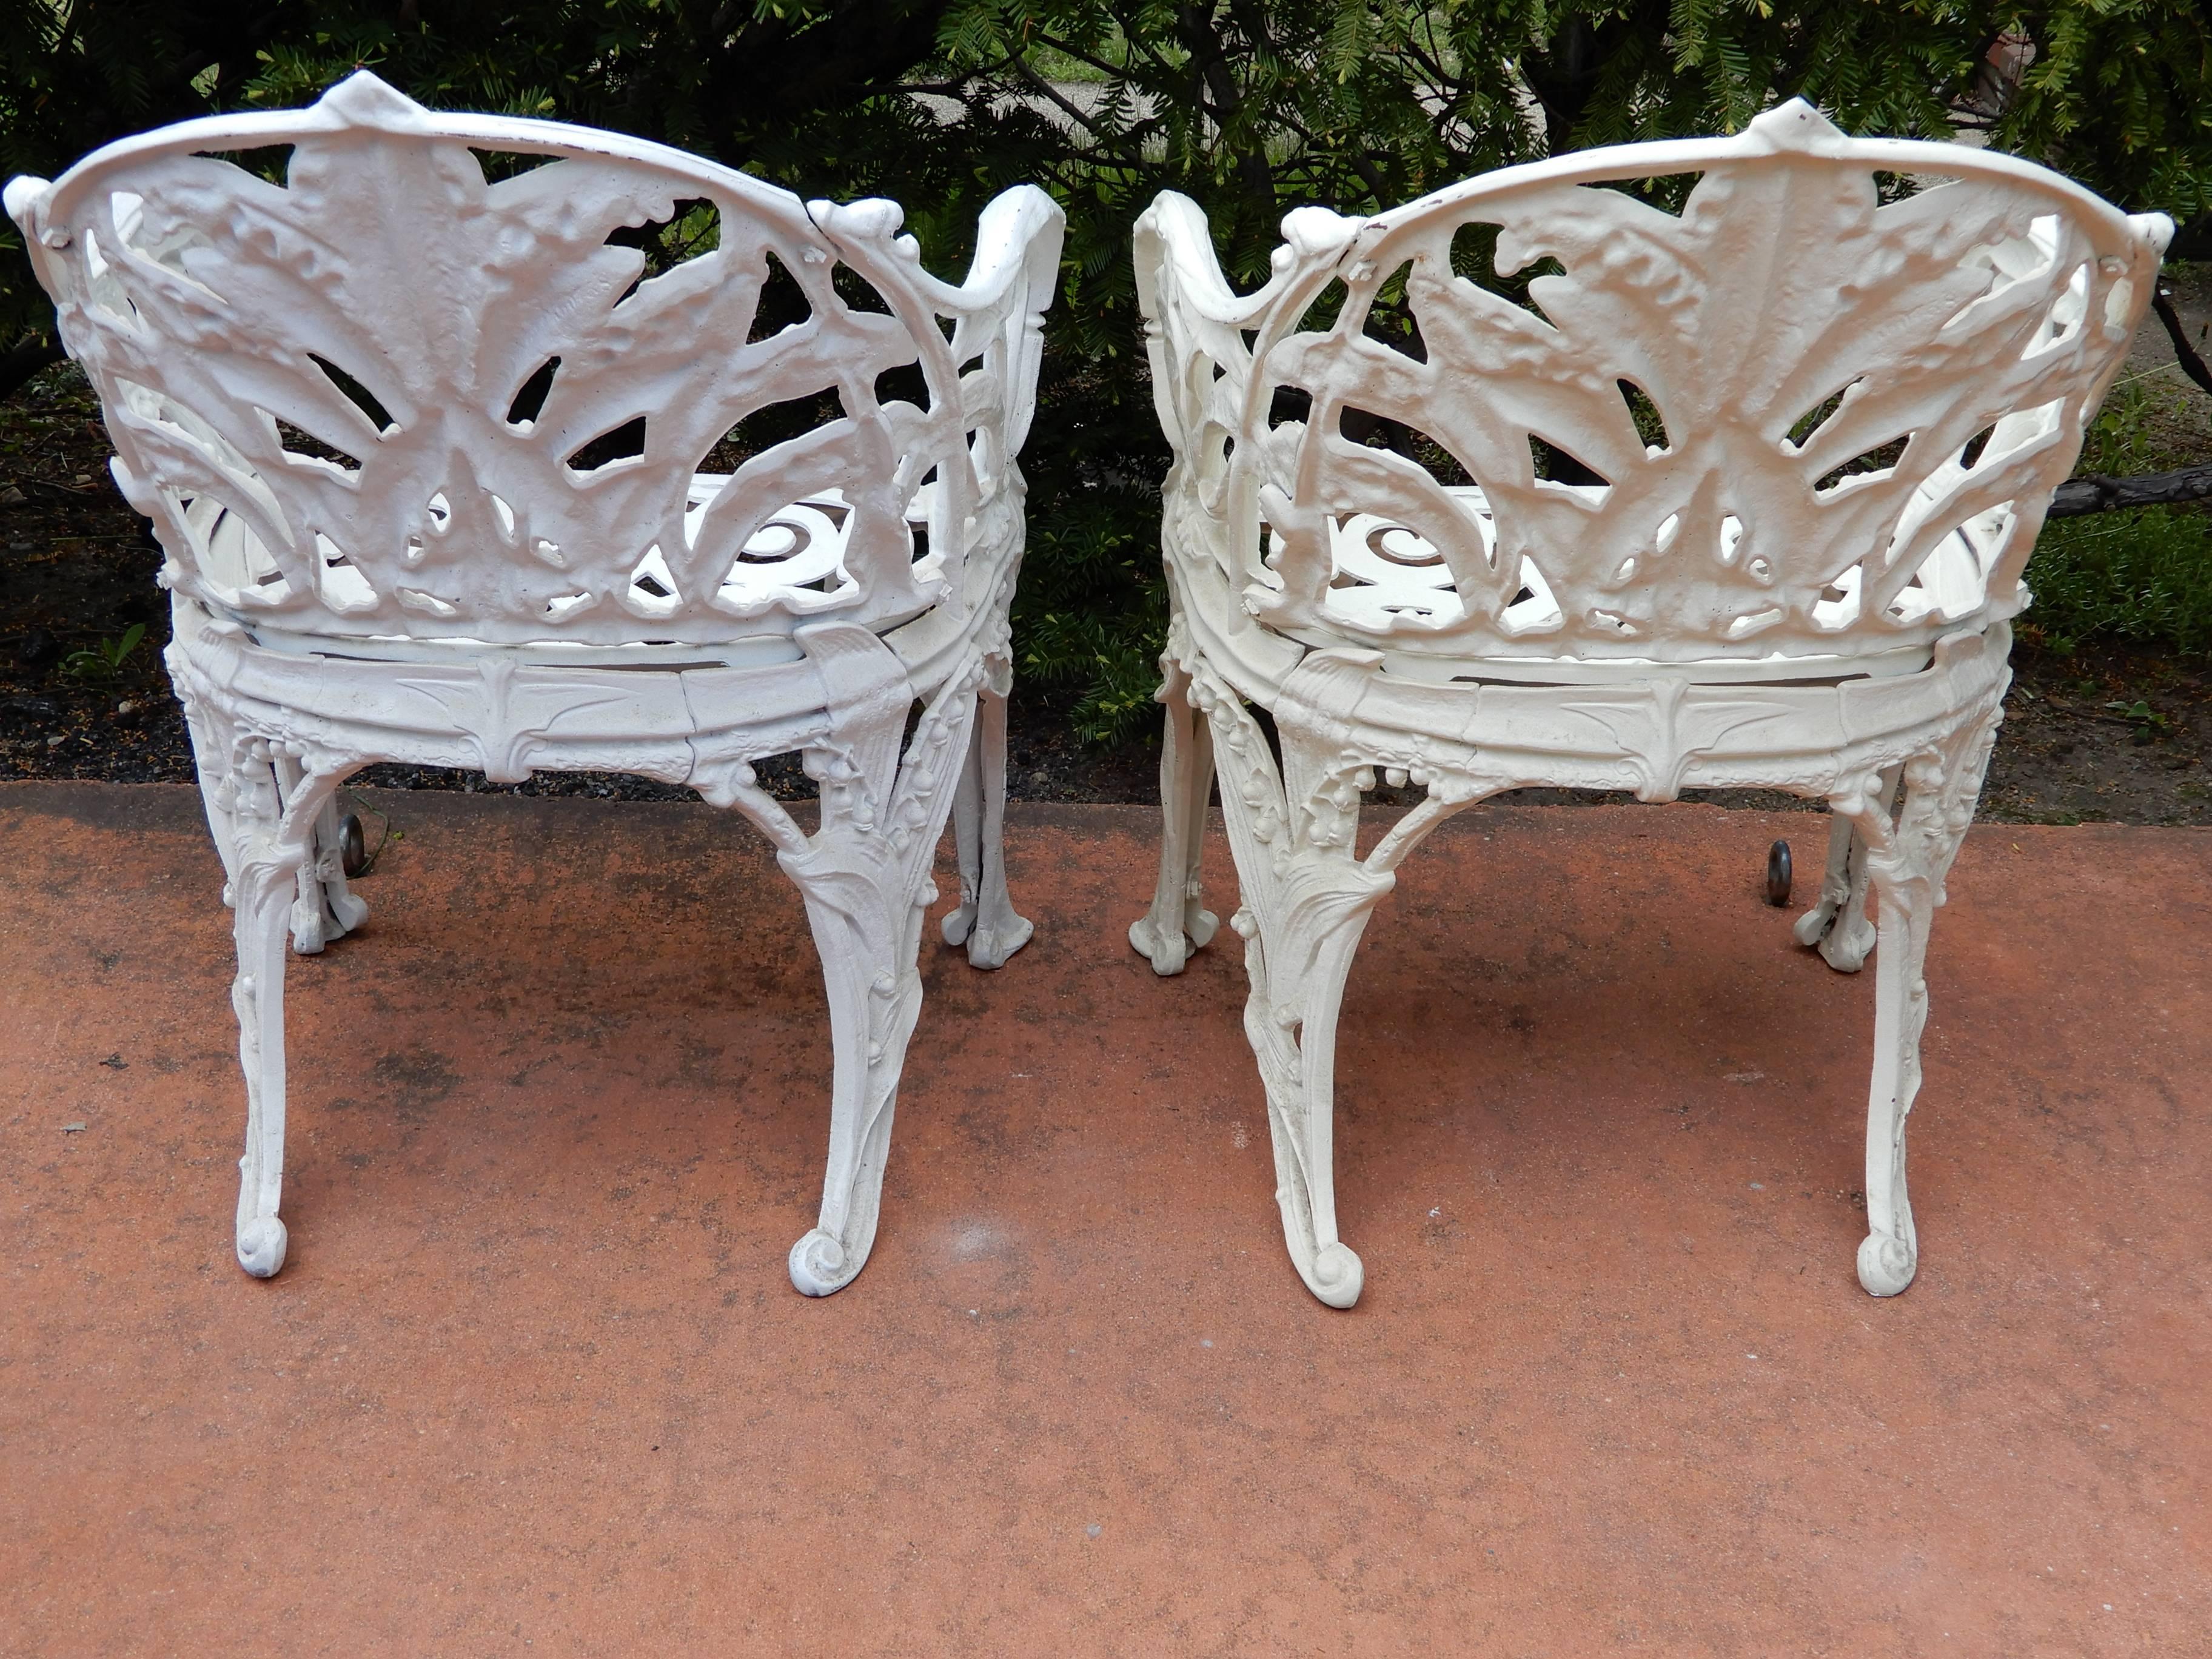 A pair of Lily of the Valley garden chairs. The lily of the valley chairs with naturalistic detail.
The chairs surprisingly are made of cast aluminum which makes them easier to move. The cast aluminum will not rust the way iron will and are